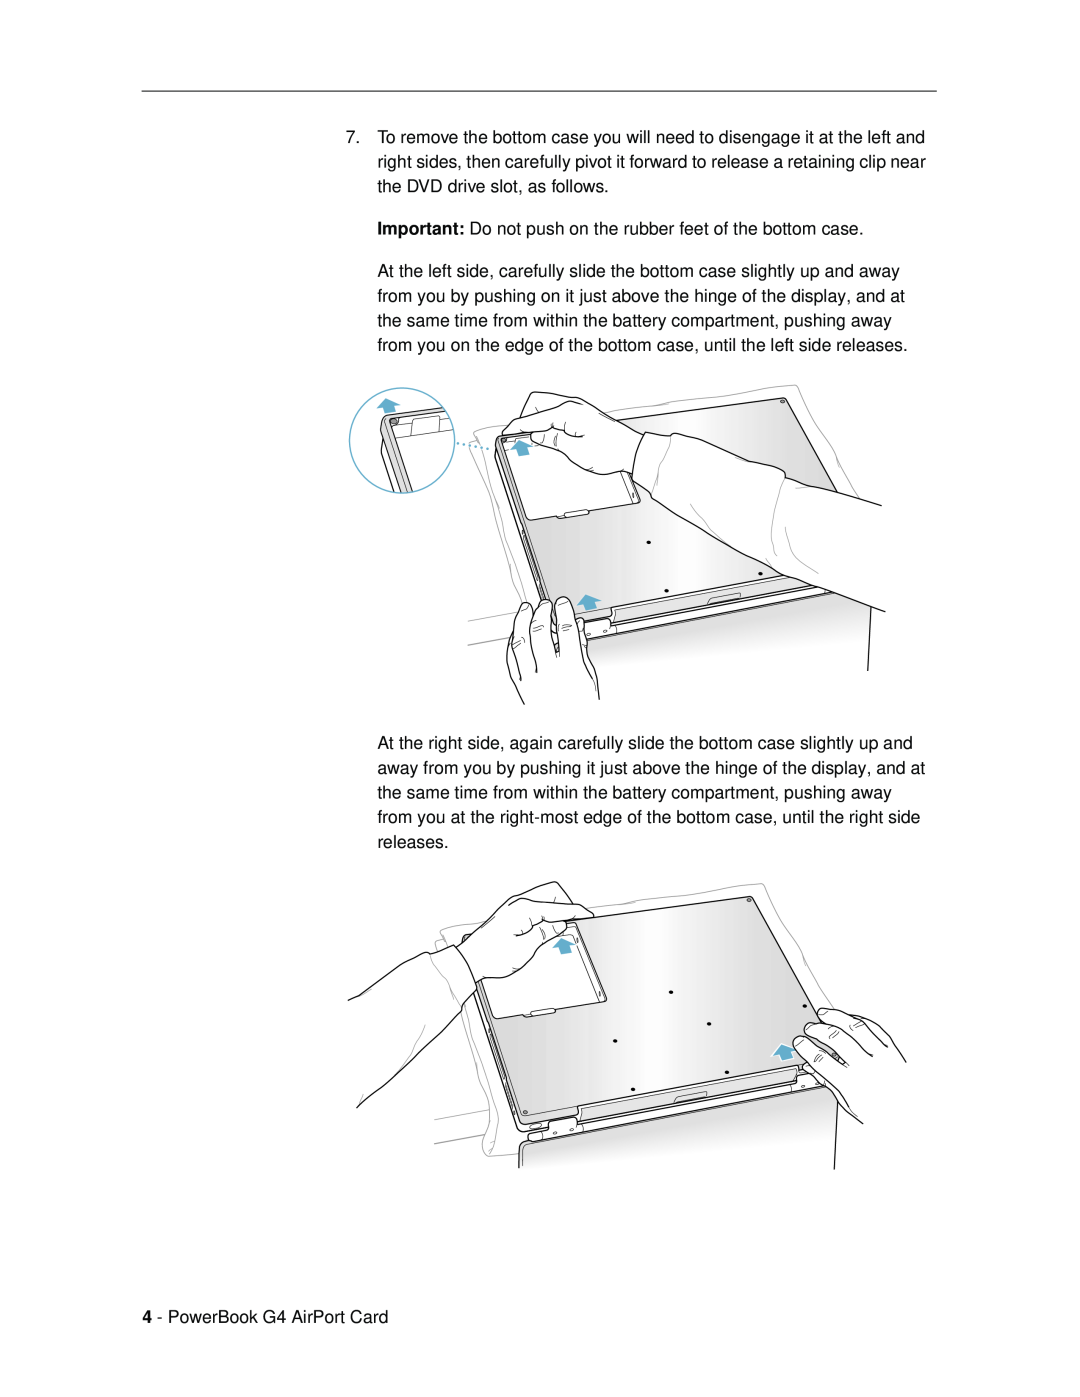 Apple installation instructions Important Do not push on the rubber feet of the bottom case, PowerBook G4 AirPort Card 